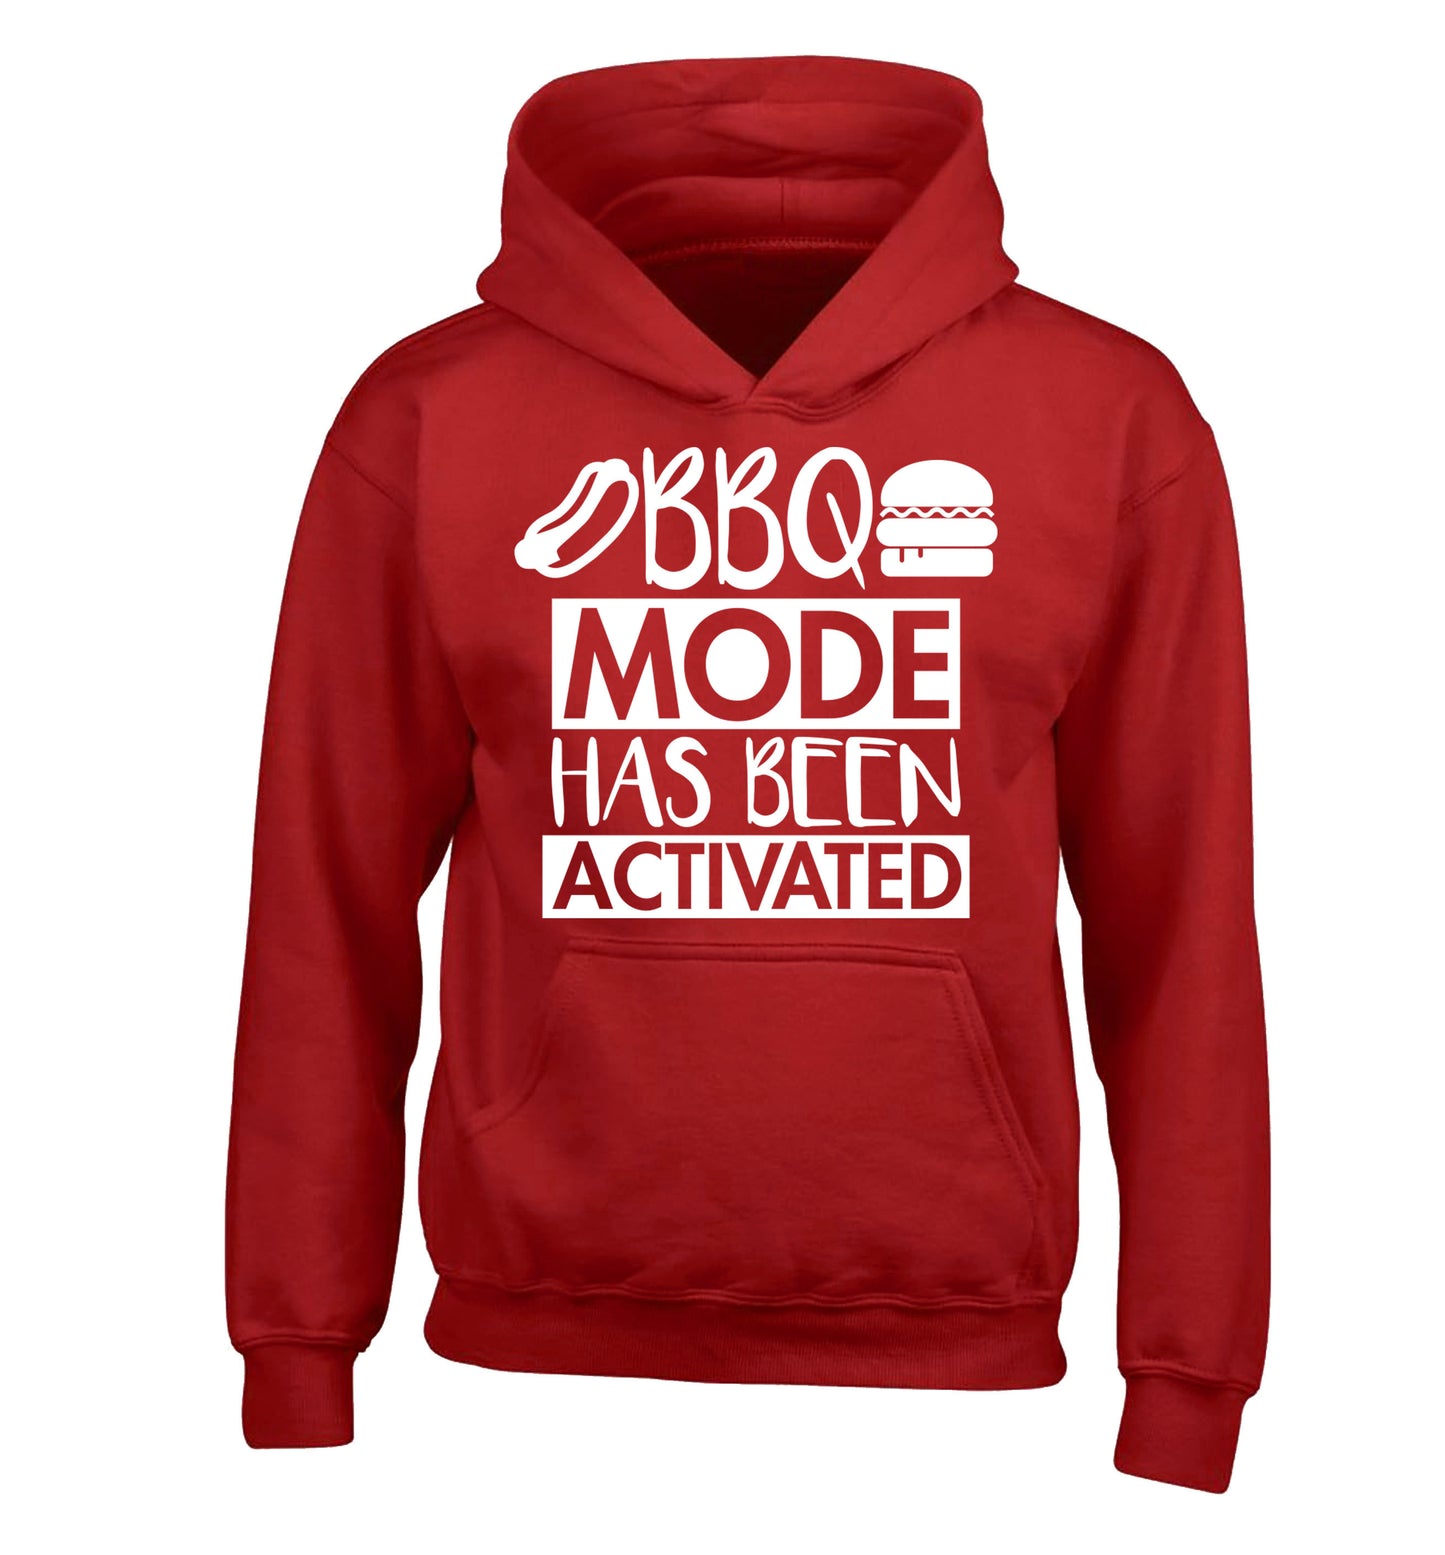 Bbq mode has been activated children's red hoodie 12-14 Years